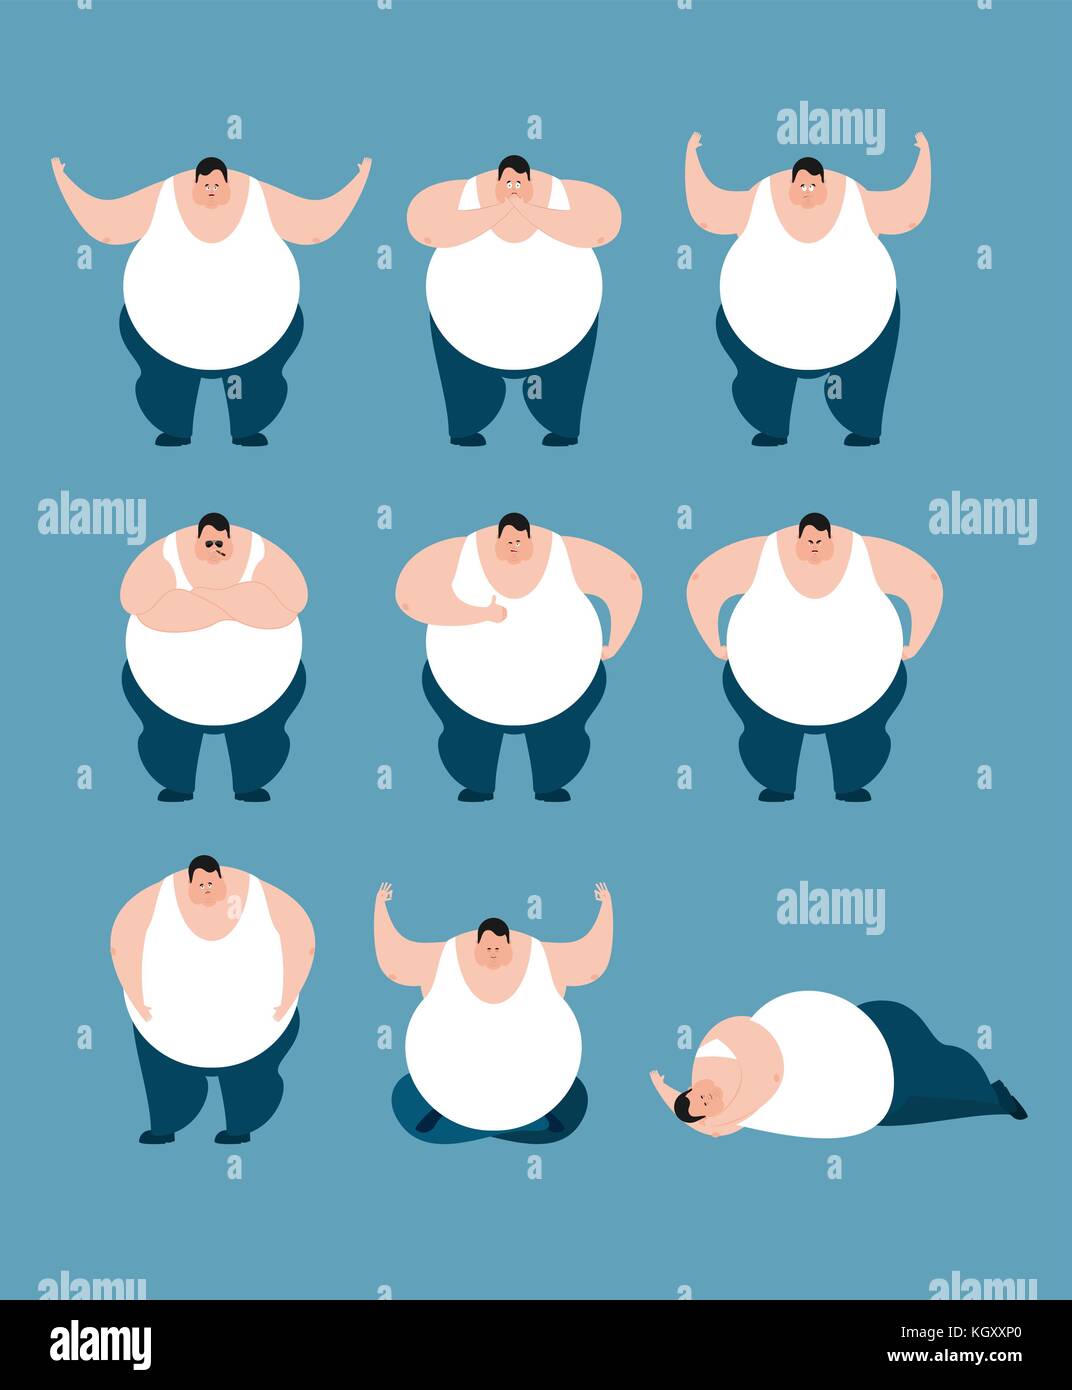 Chubby heavy man with a belly character set. Overweight and fat body shape,  middle aged bold